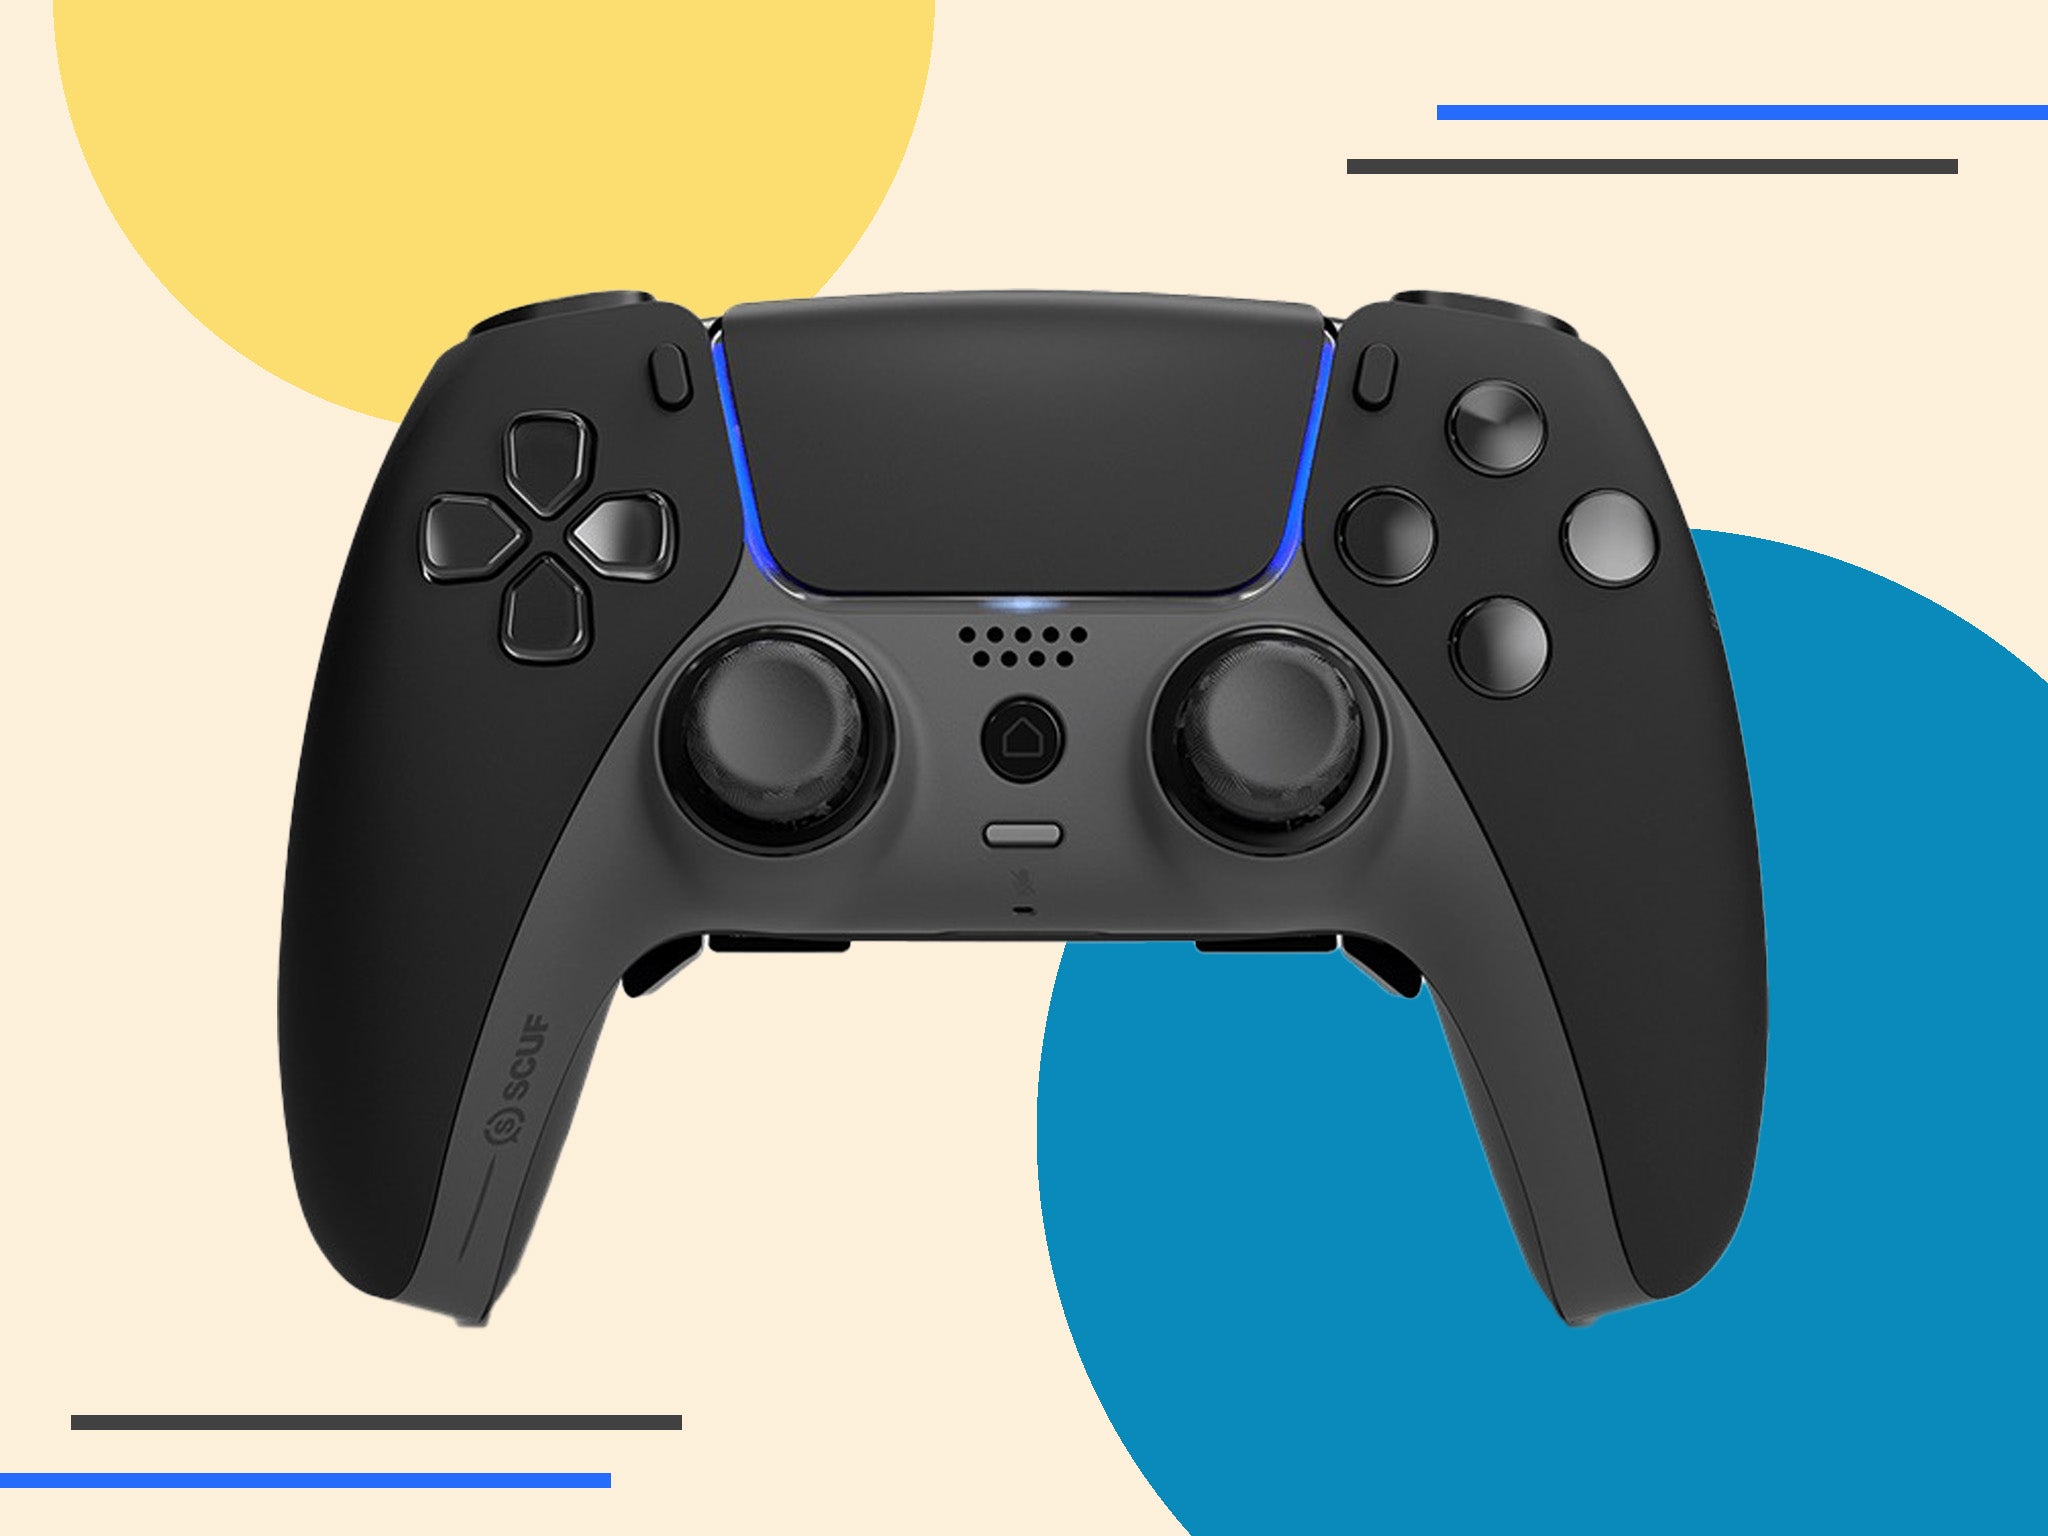 The scuf reflex feels as good in your hands as an official controller while offering additional benefits, such as extra triggers and an improved grip